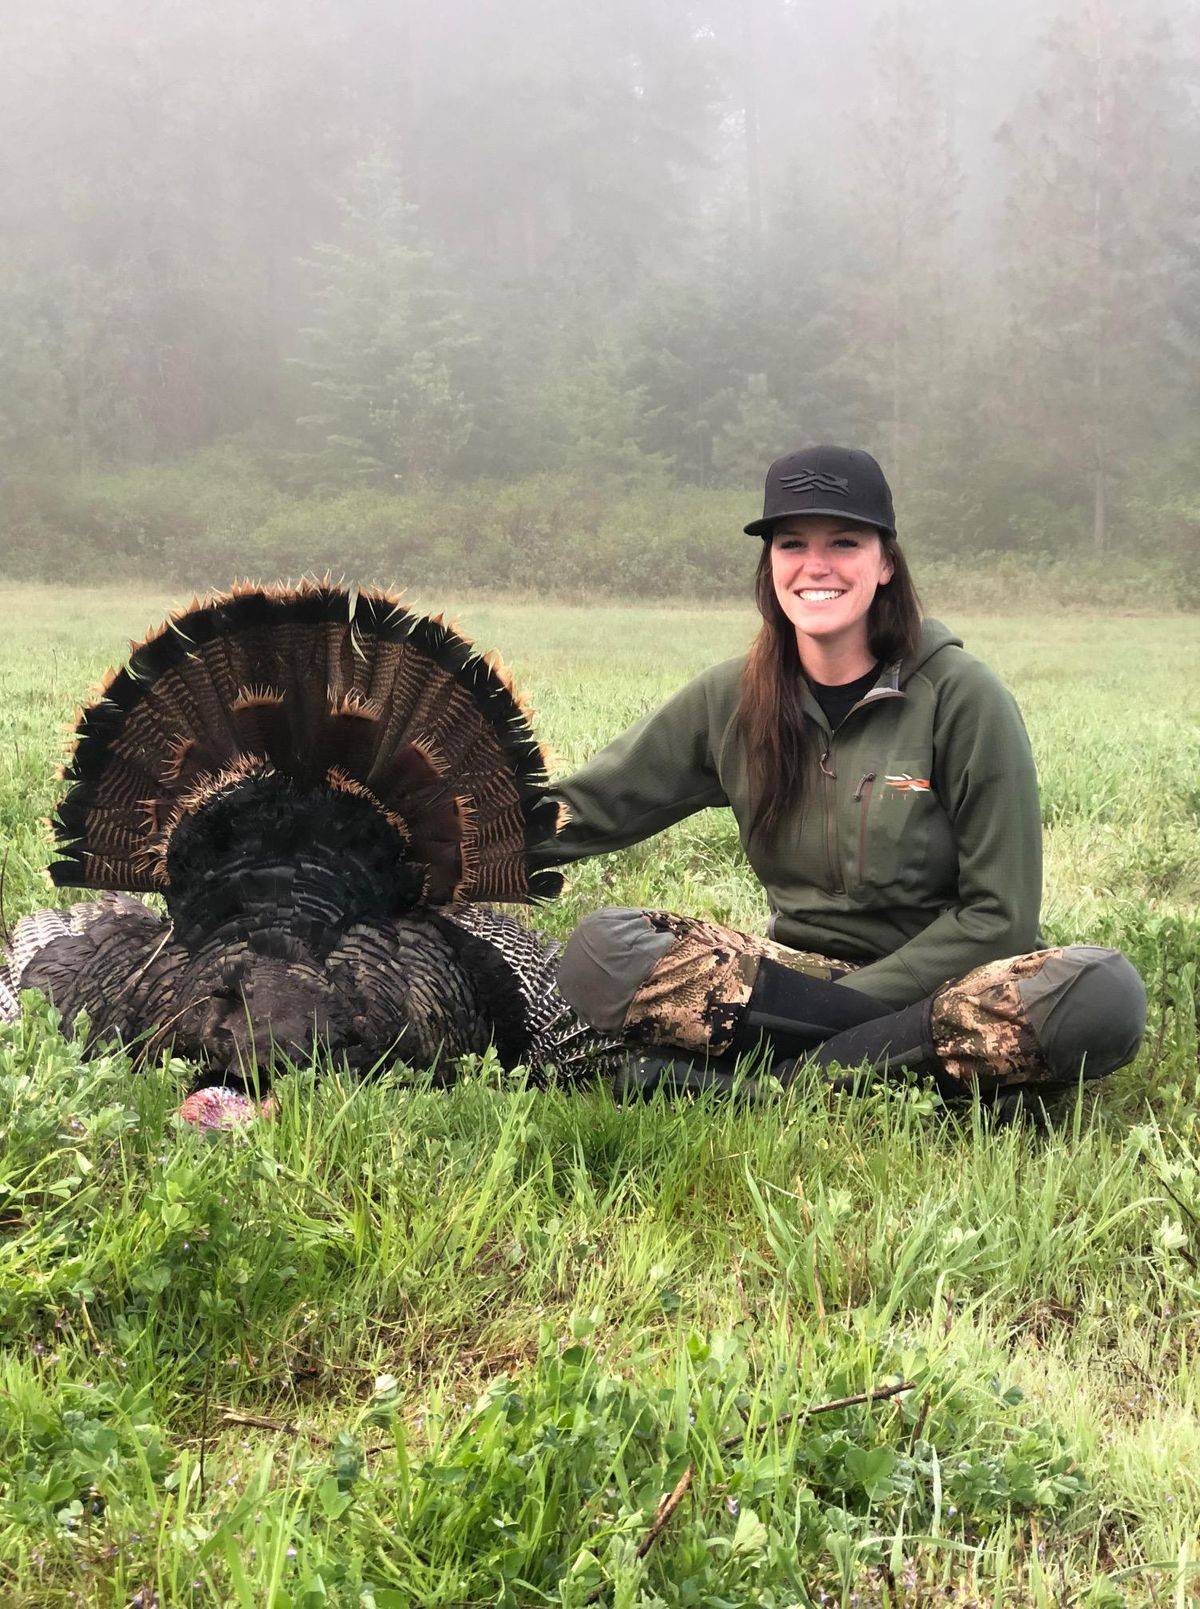 Jamie Belknap poses next to a turkey turkey in Deer Park during the spring of 2018. (Courtesy)